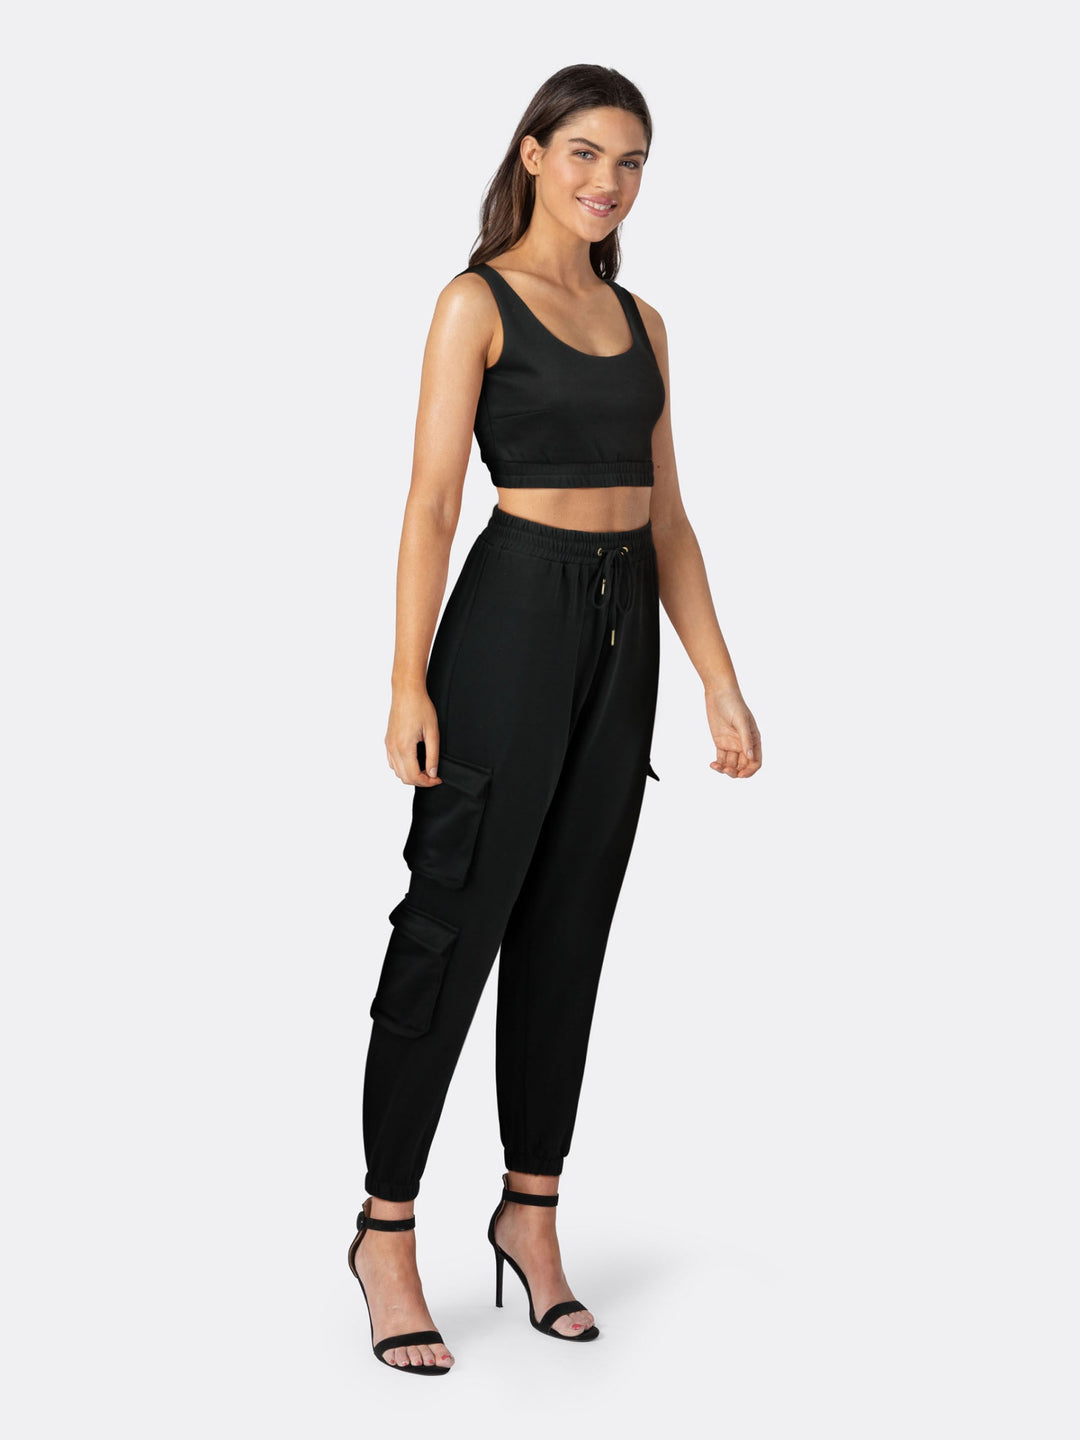 Pack of Joggers with Pockets and Crop Top Black Side